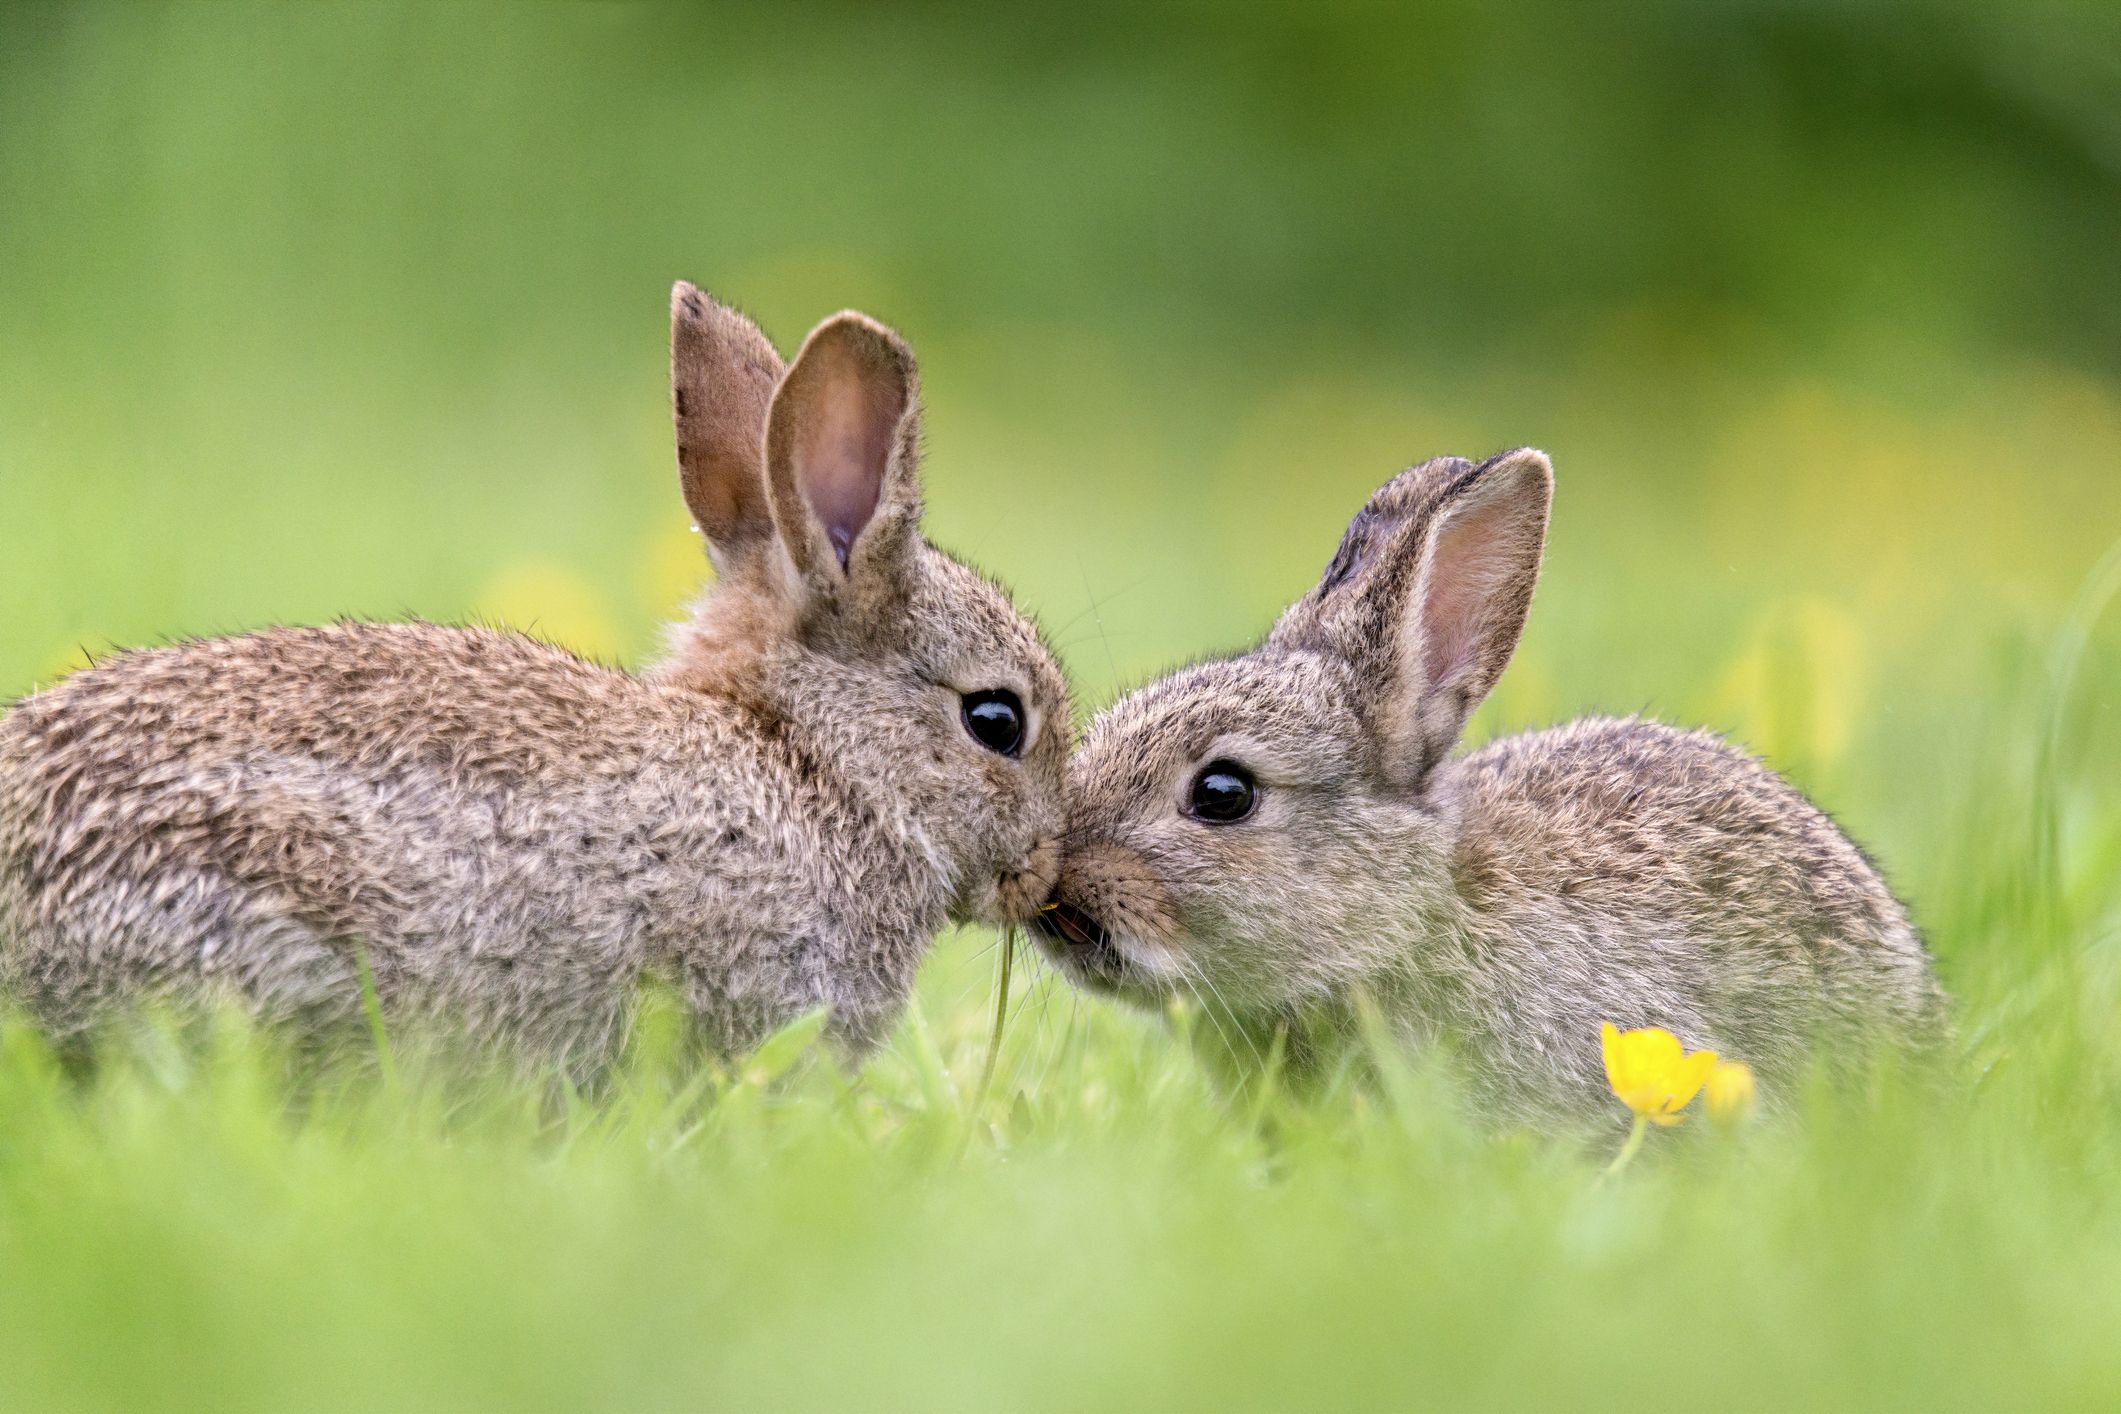 Rabbit Rabbit! The Meaning Behind the Good Luck Superstition